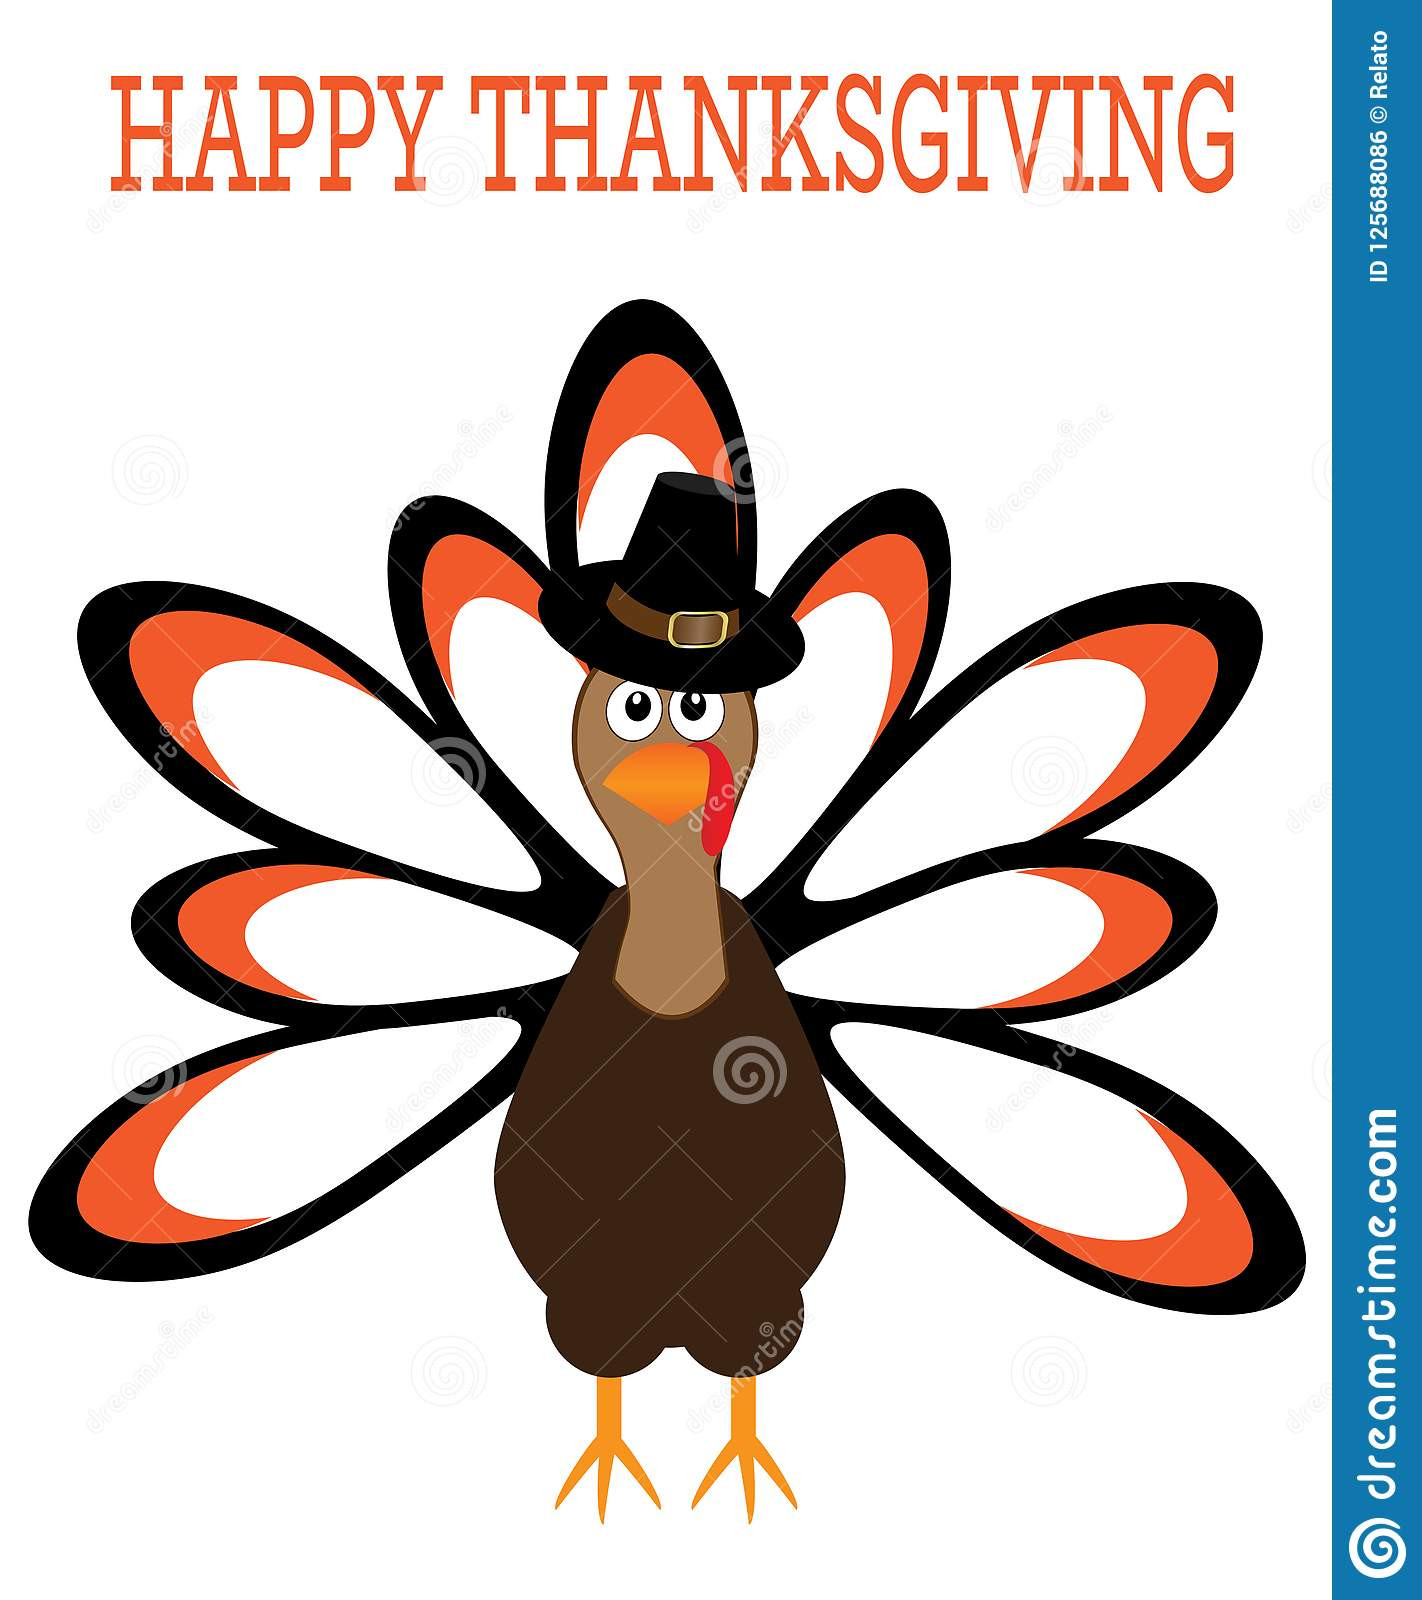 Happy Thanksgiving Turkey
 Vector Happy Thanksgiving Background With Turkey Stock